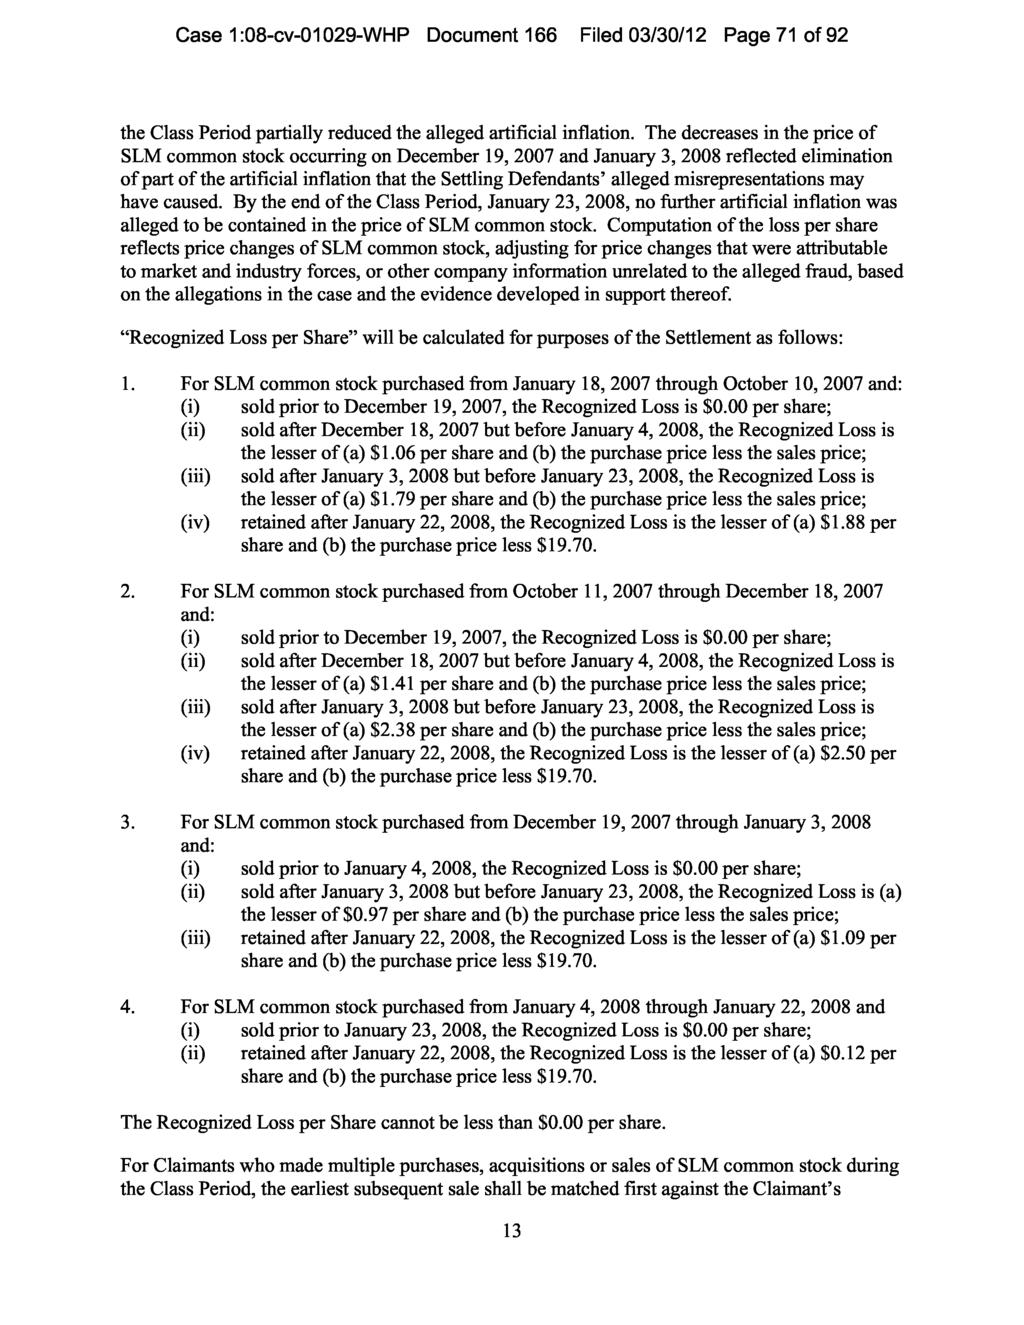 Case 1:08-cv-01029-WHP Document 166 Filed 03/30/12 Page 71 of 92 the Class Period partially reduced the alleged artificial inflation.